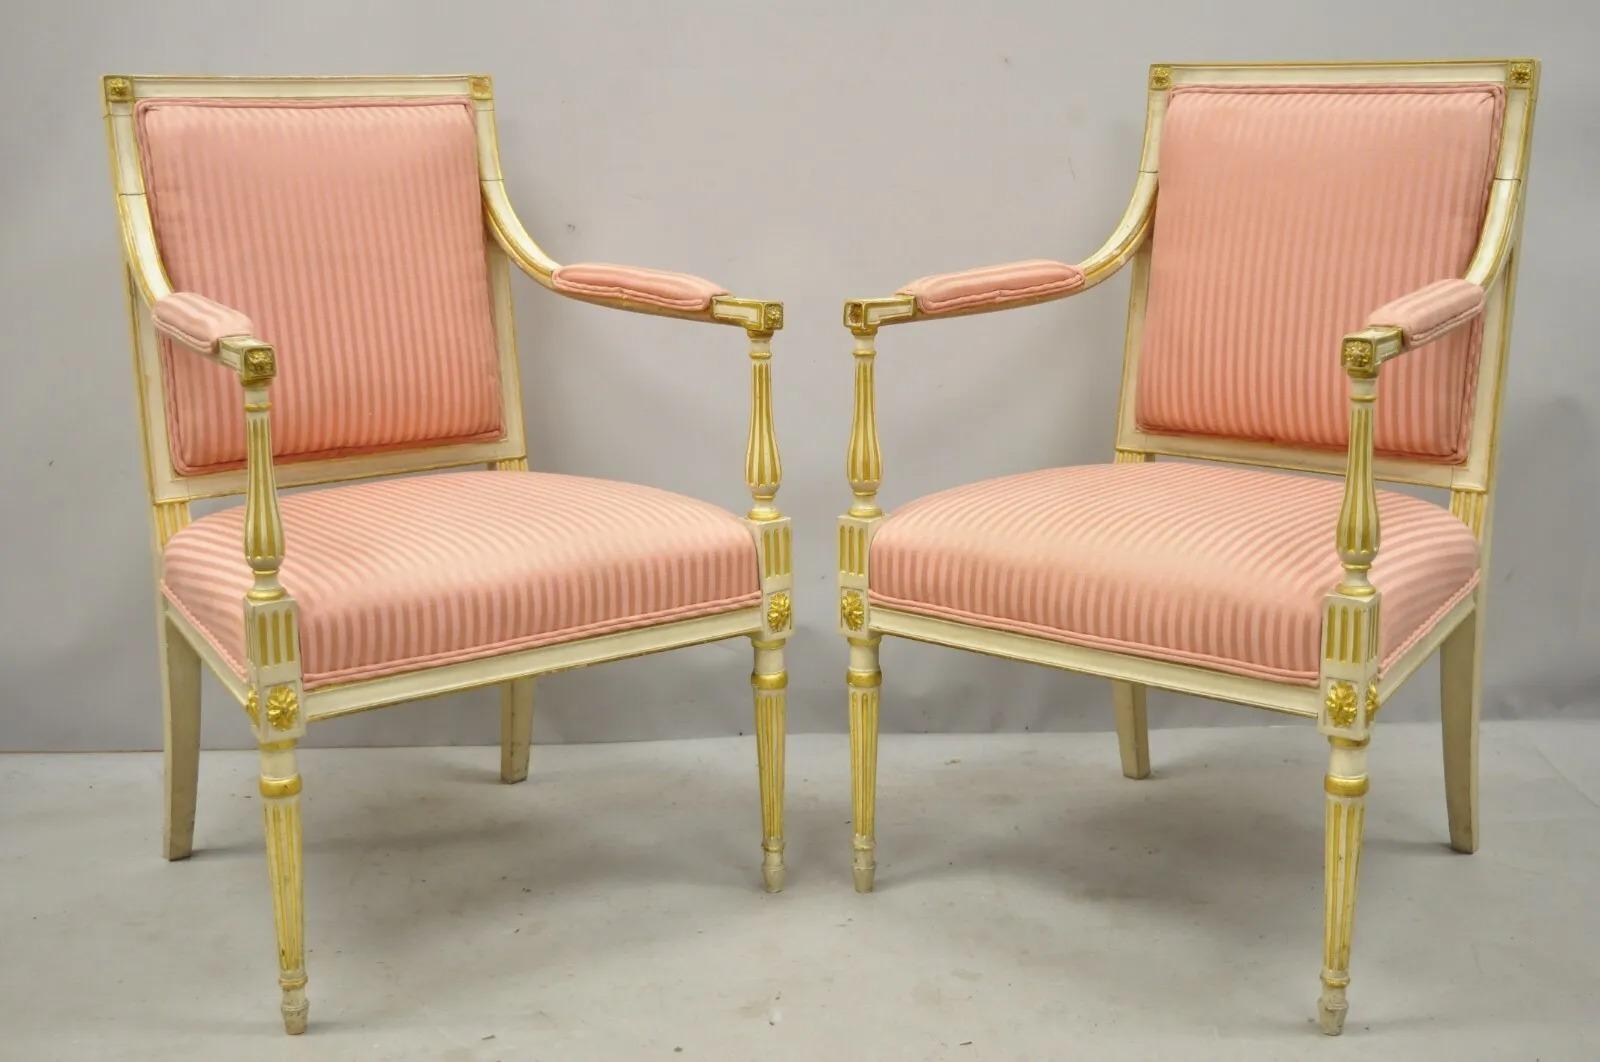 Pair of Italian Neoclassical Parcel Gilt Cream French Louis XVI Directoire Arm Chairs (A). Item features dream and gold gilt finish, solid wood frame, upholstered armrests, nicely carved details, tapered legs, great style and form. Circa Early